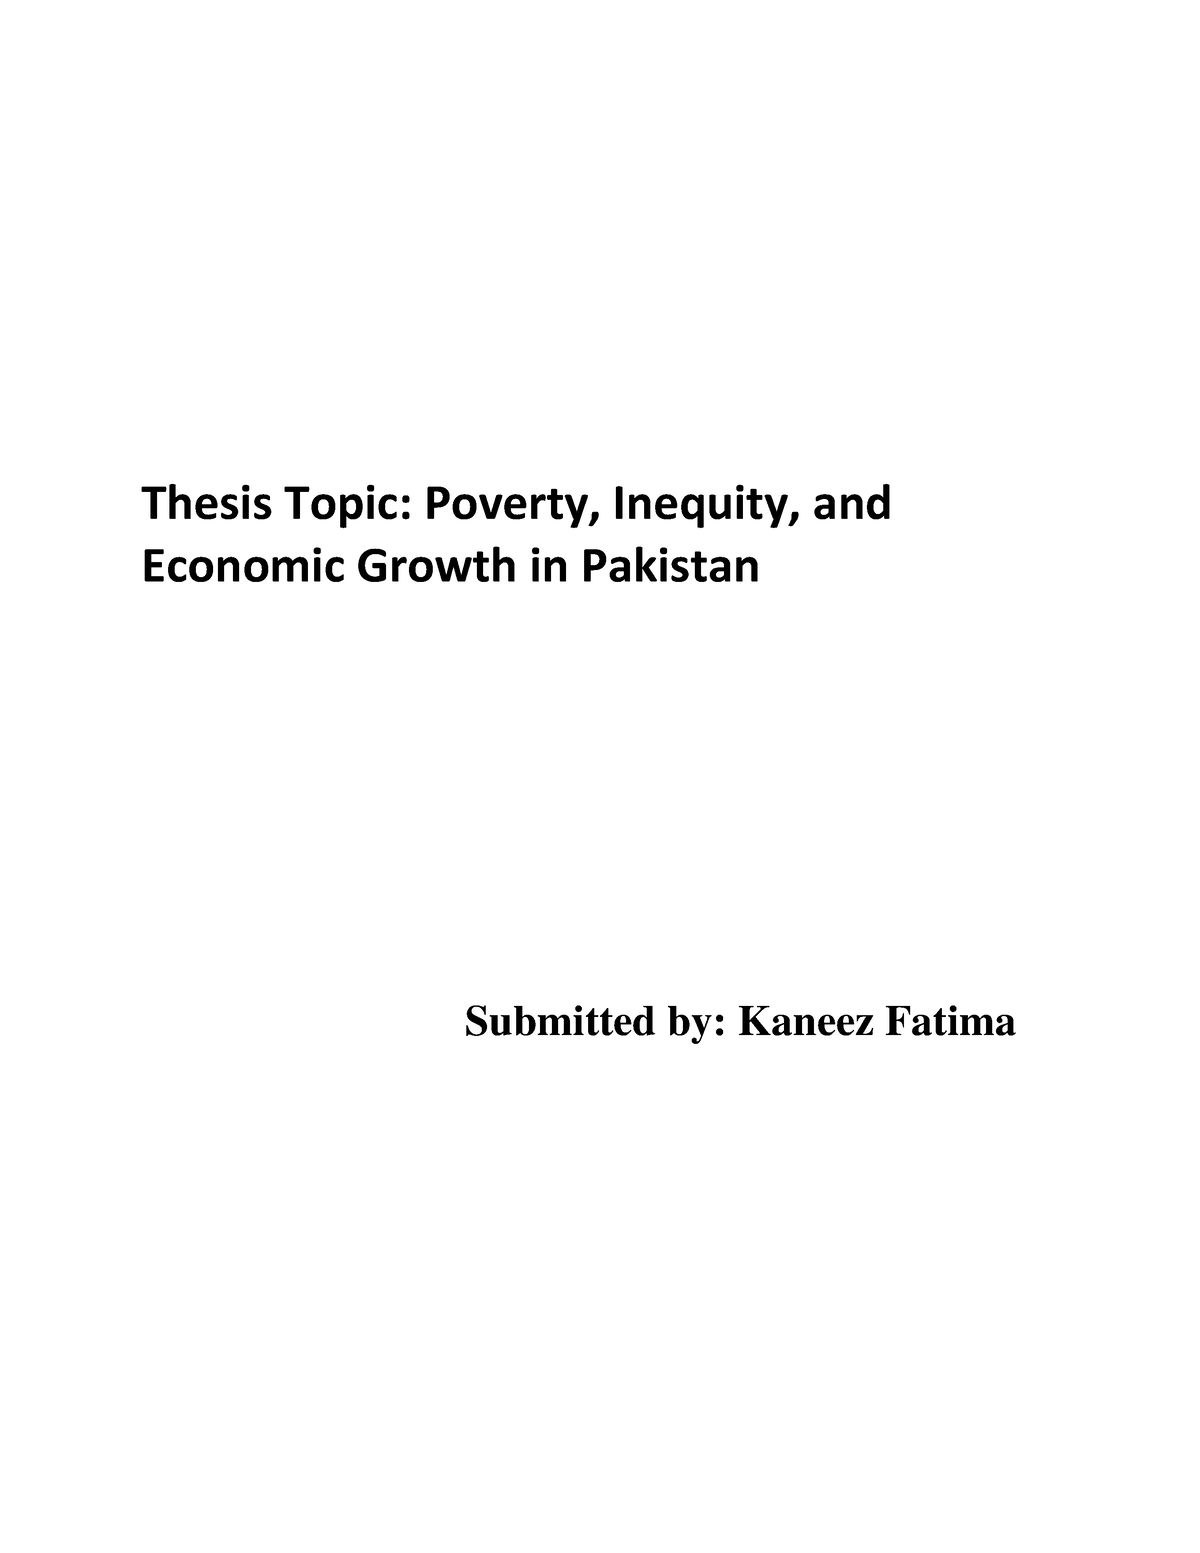 poverty in pakistan thesis statement